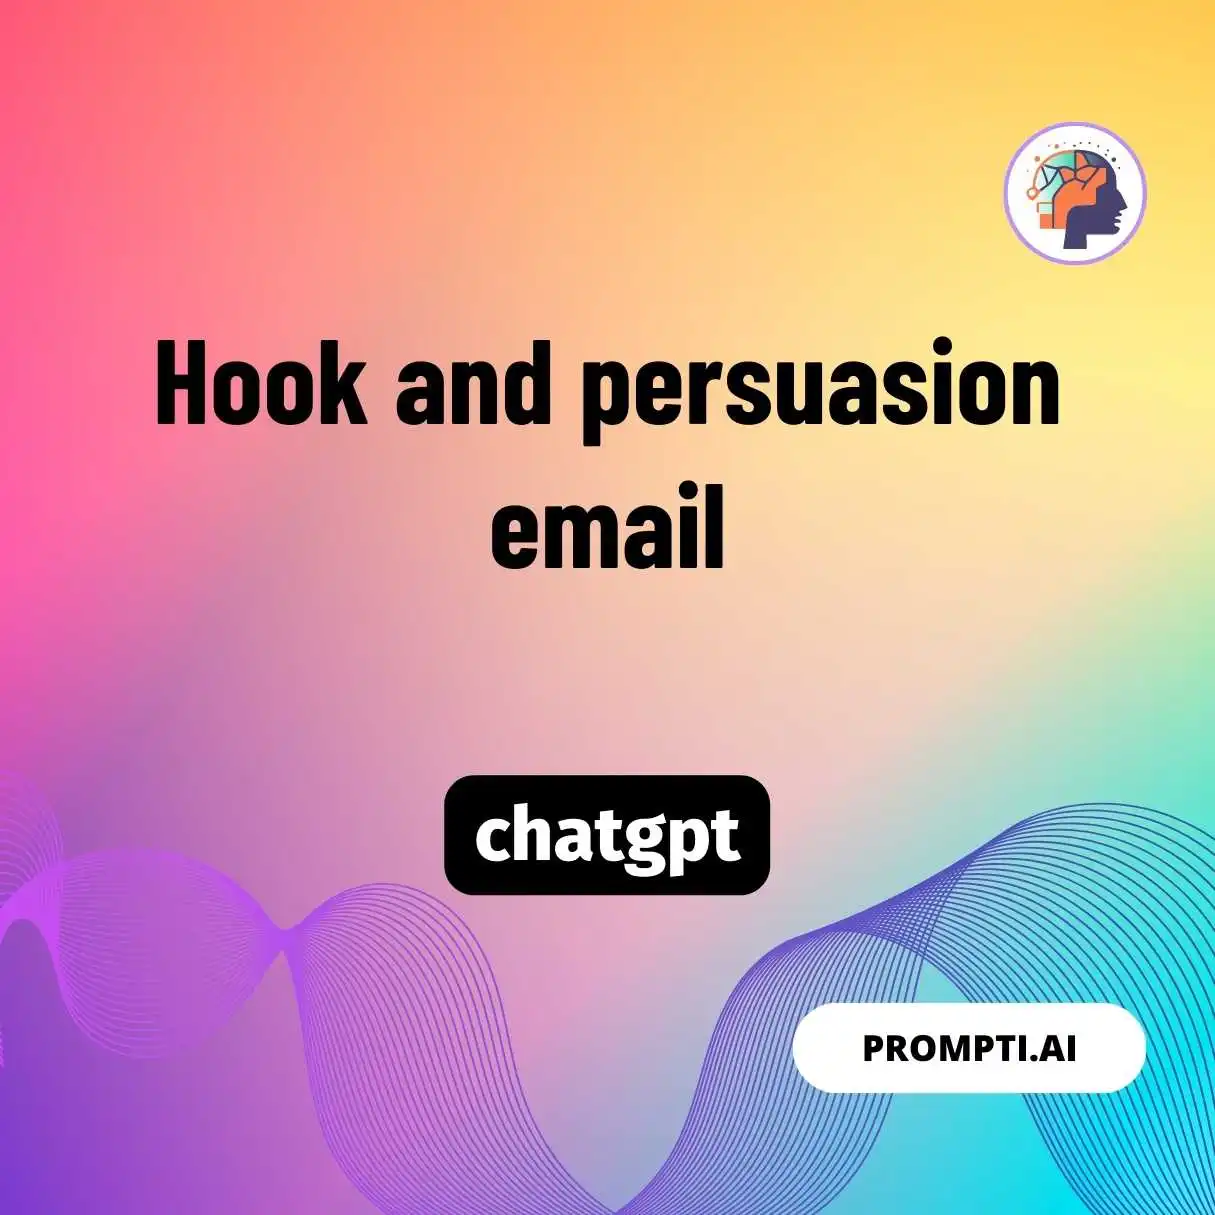 Hook and persuasion email